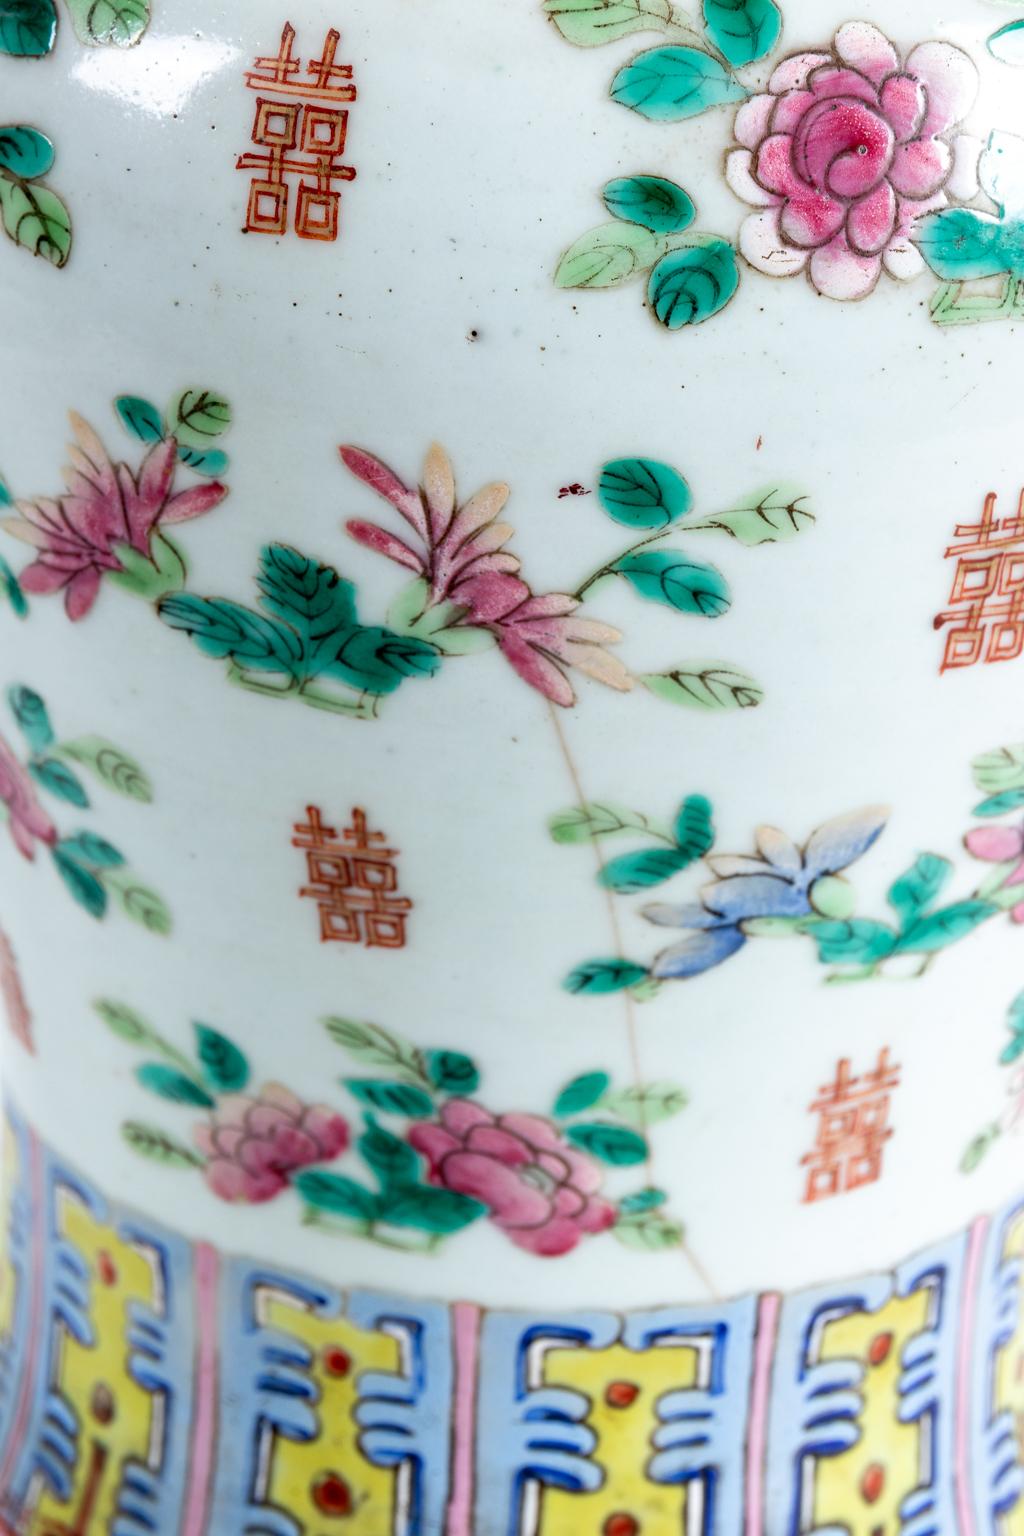 Chinese porcelain multi-color vase with floral motifs, circa 19th century. Please note of wear consistent with antique age including patina and minor paint loss.